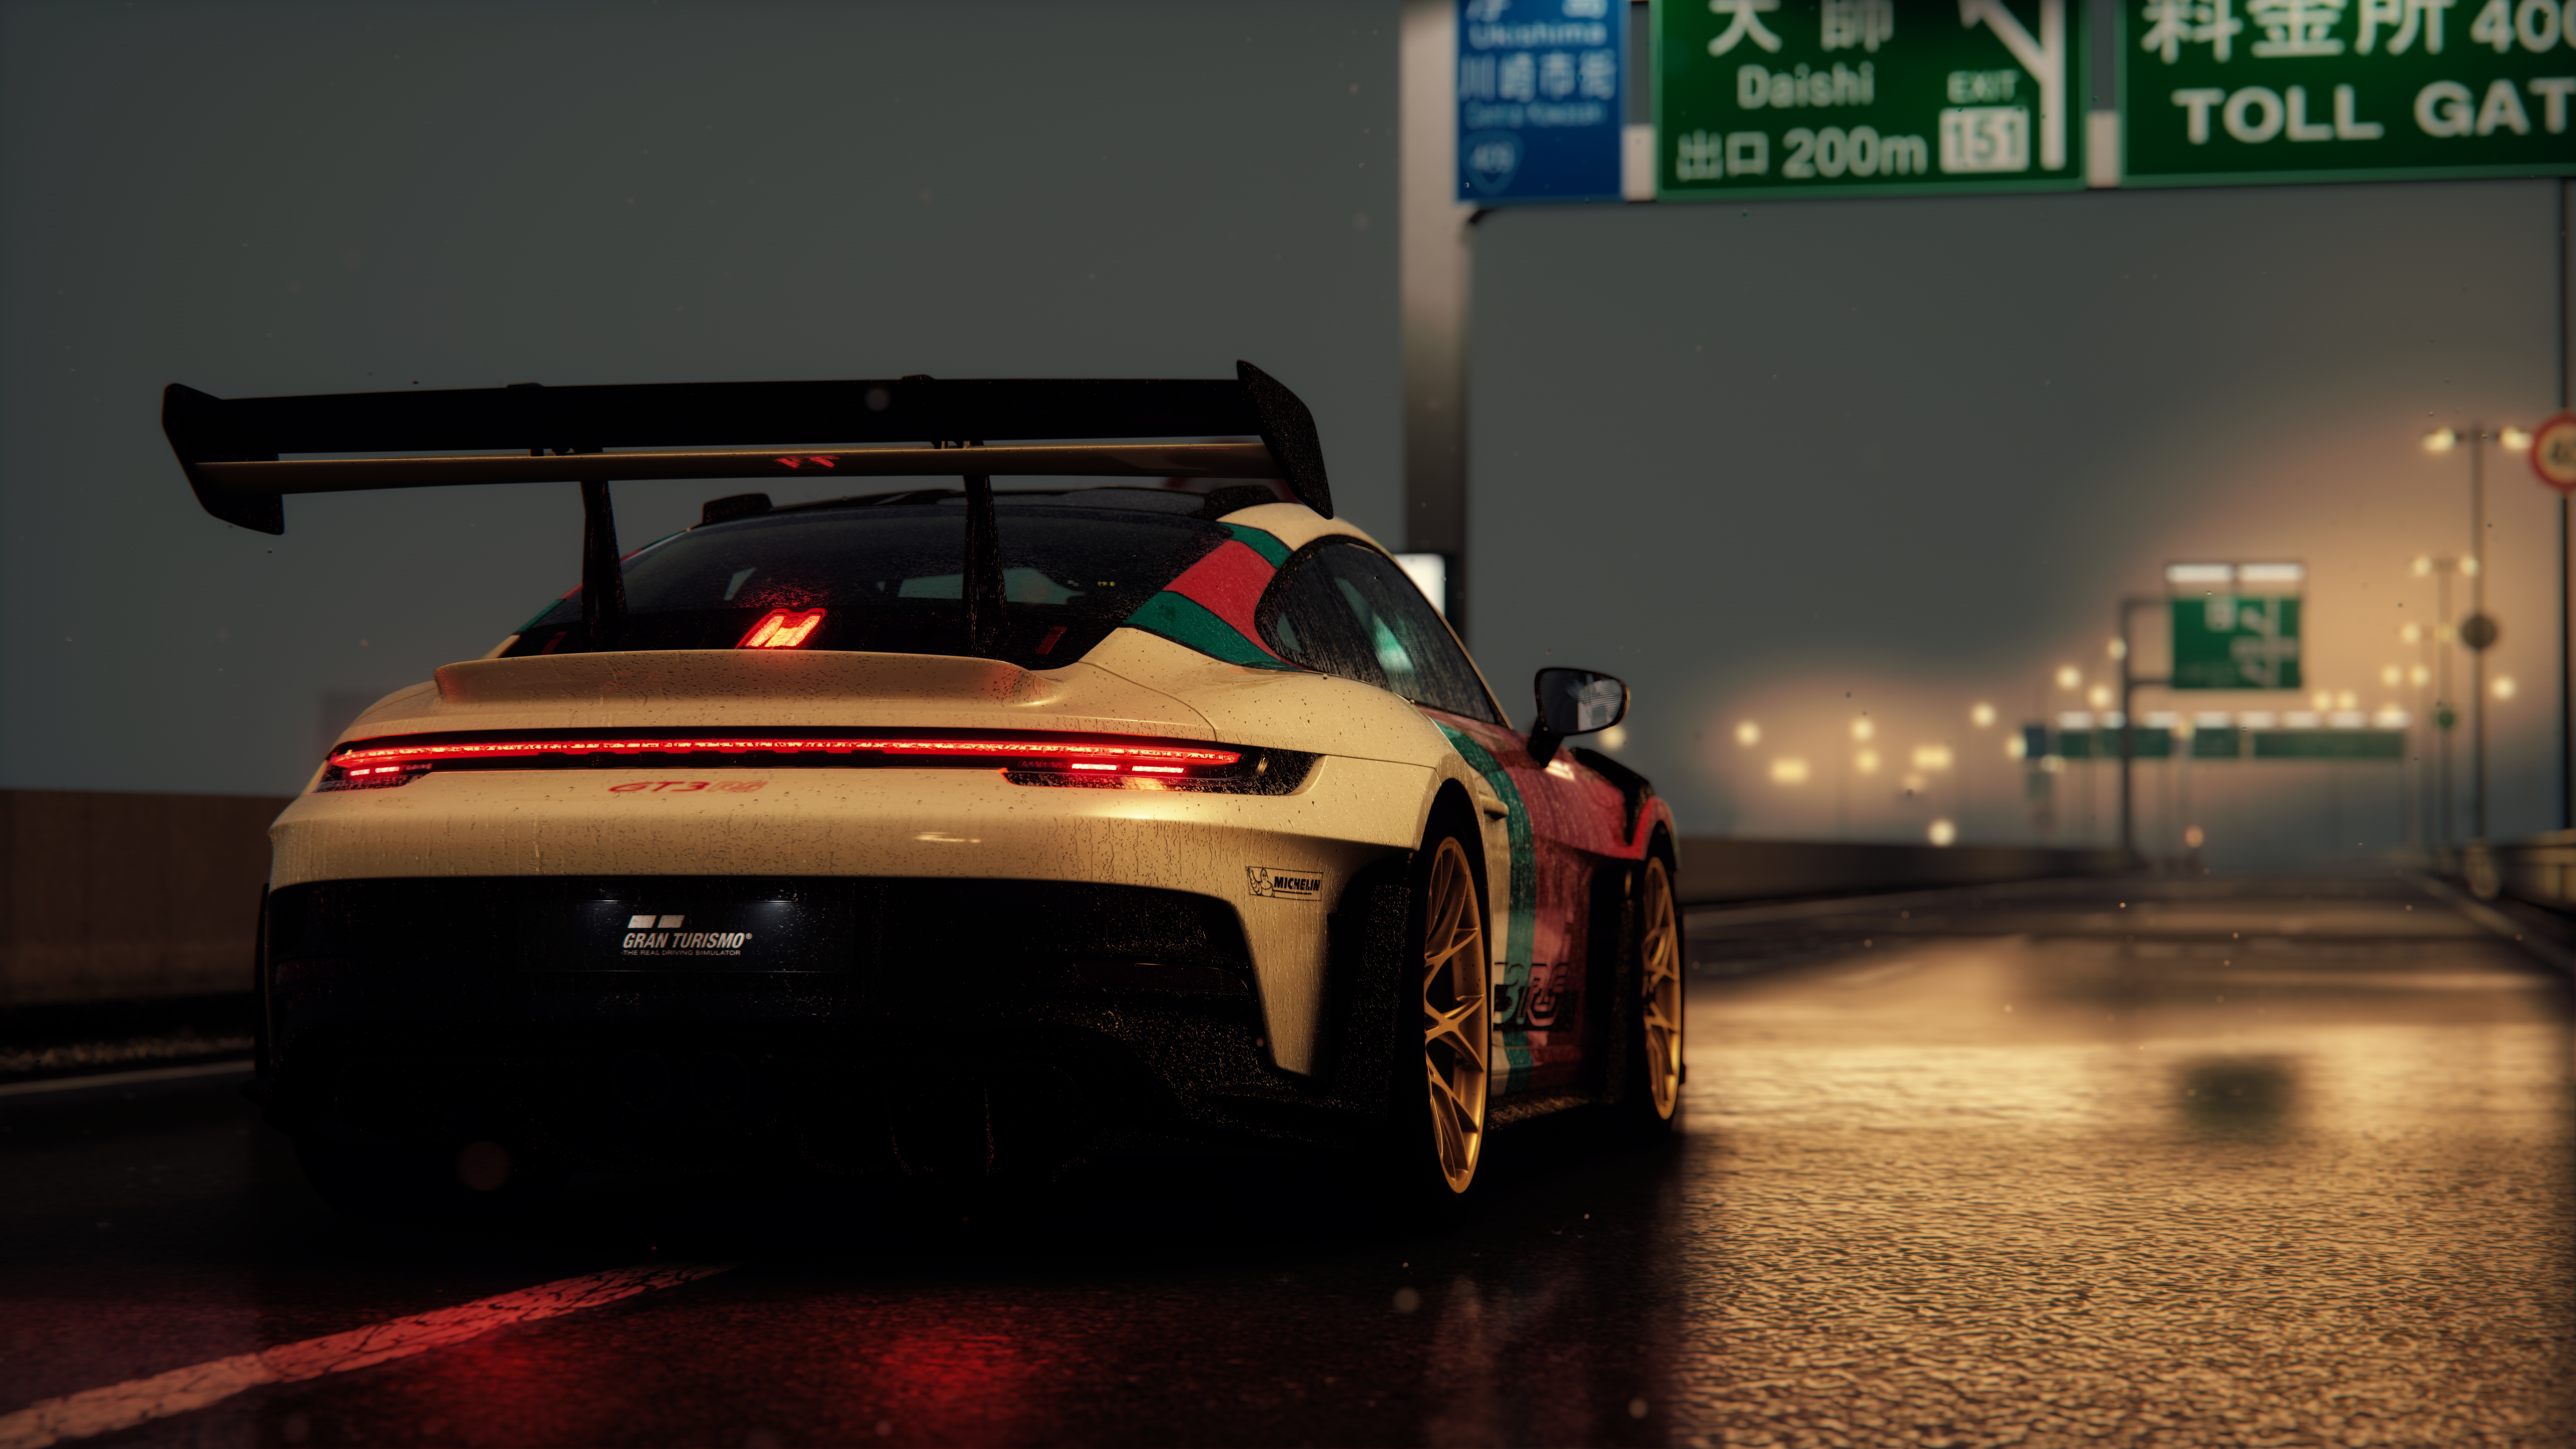 General 7680x4320 Porsche 911 gt3rs car Assetto Corsa PC gaming video game art screen shot vehicle video games rear view taillights licence plates road street light depth of field CGI digital art